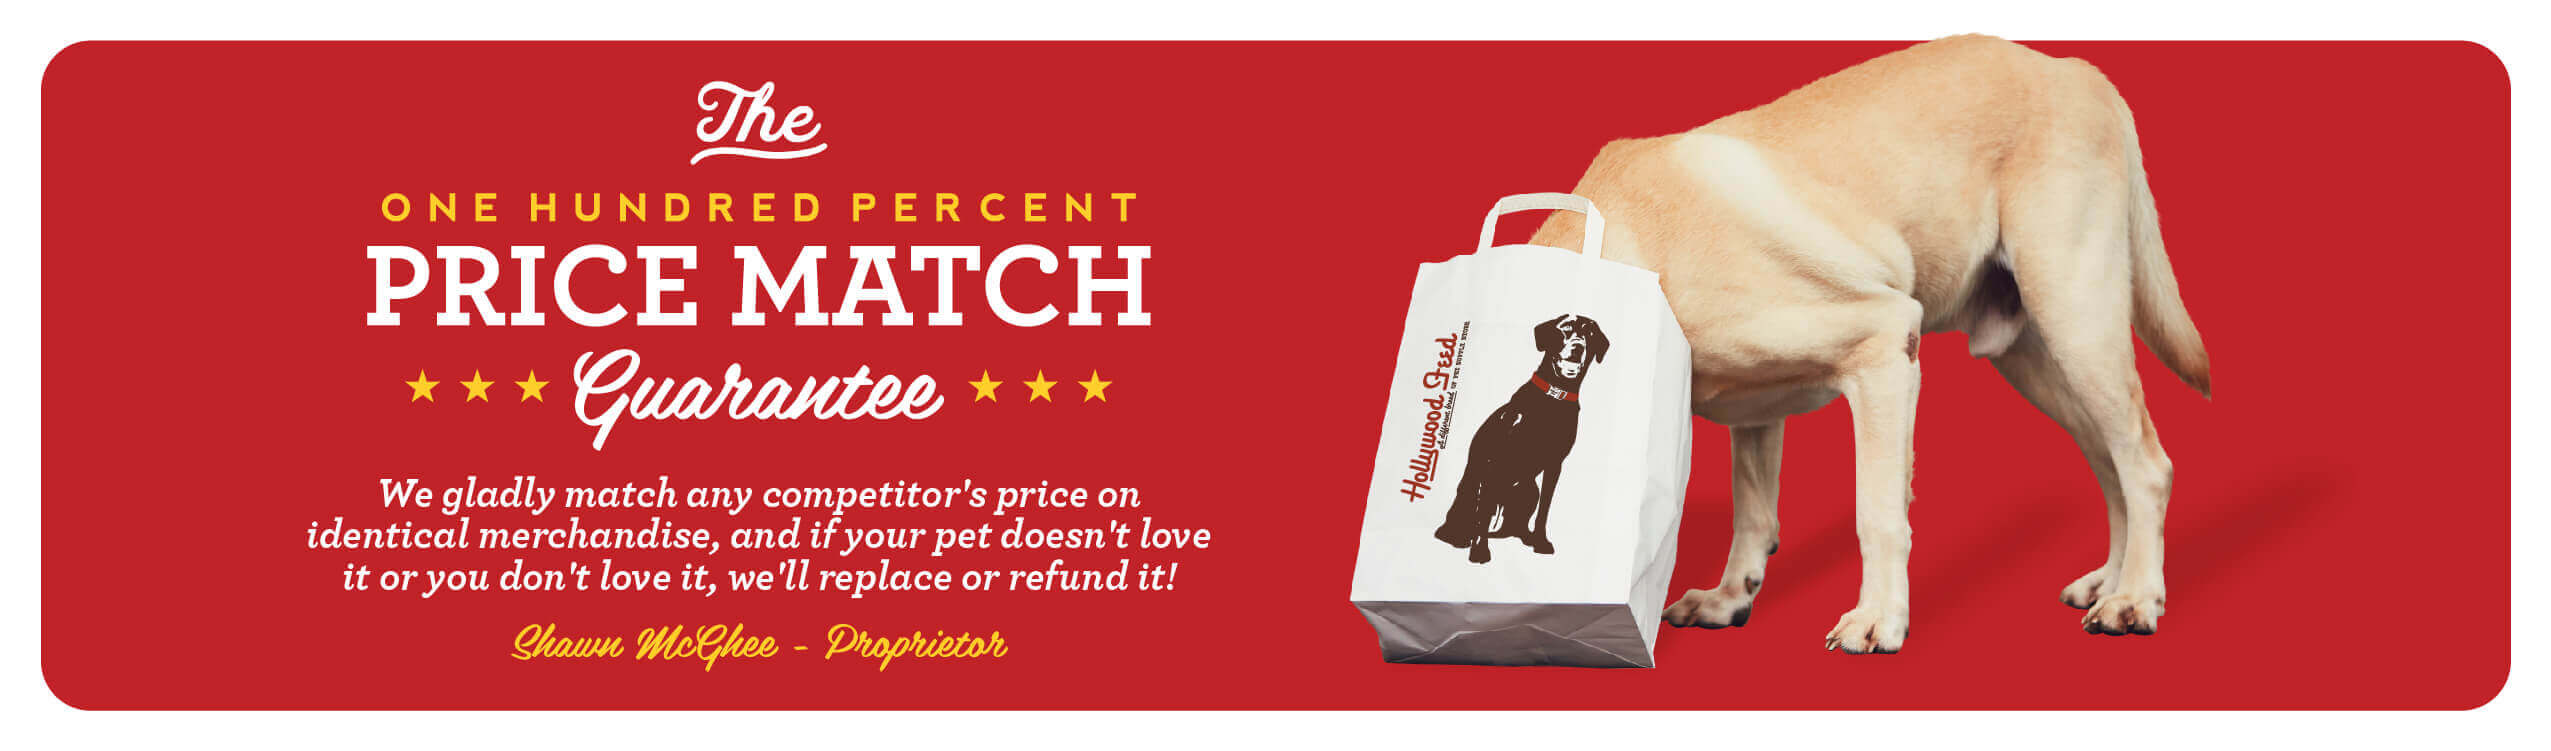 The One Hundred Percent Price Match Guarantee. We gladly match any competitors price on  identical merchandise and if your pet does not love it or you dont love it, we will replace or refund it